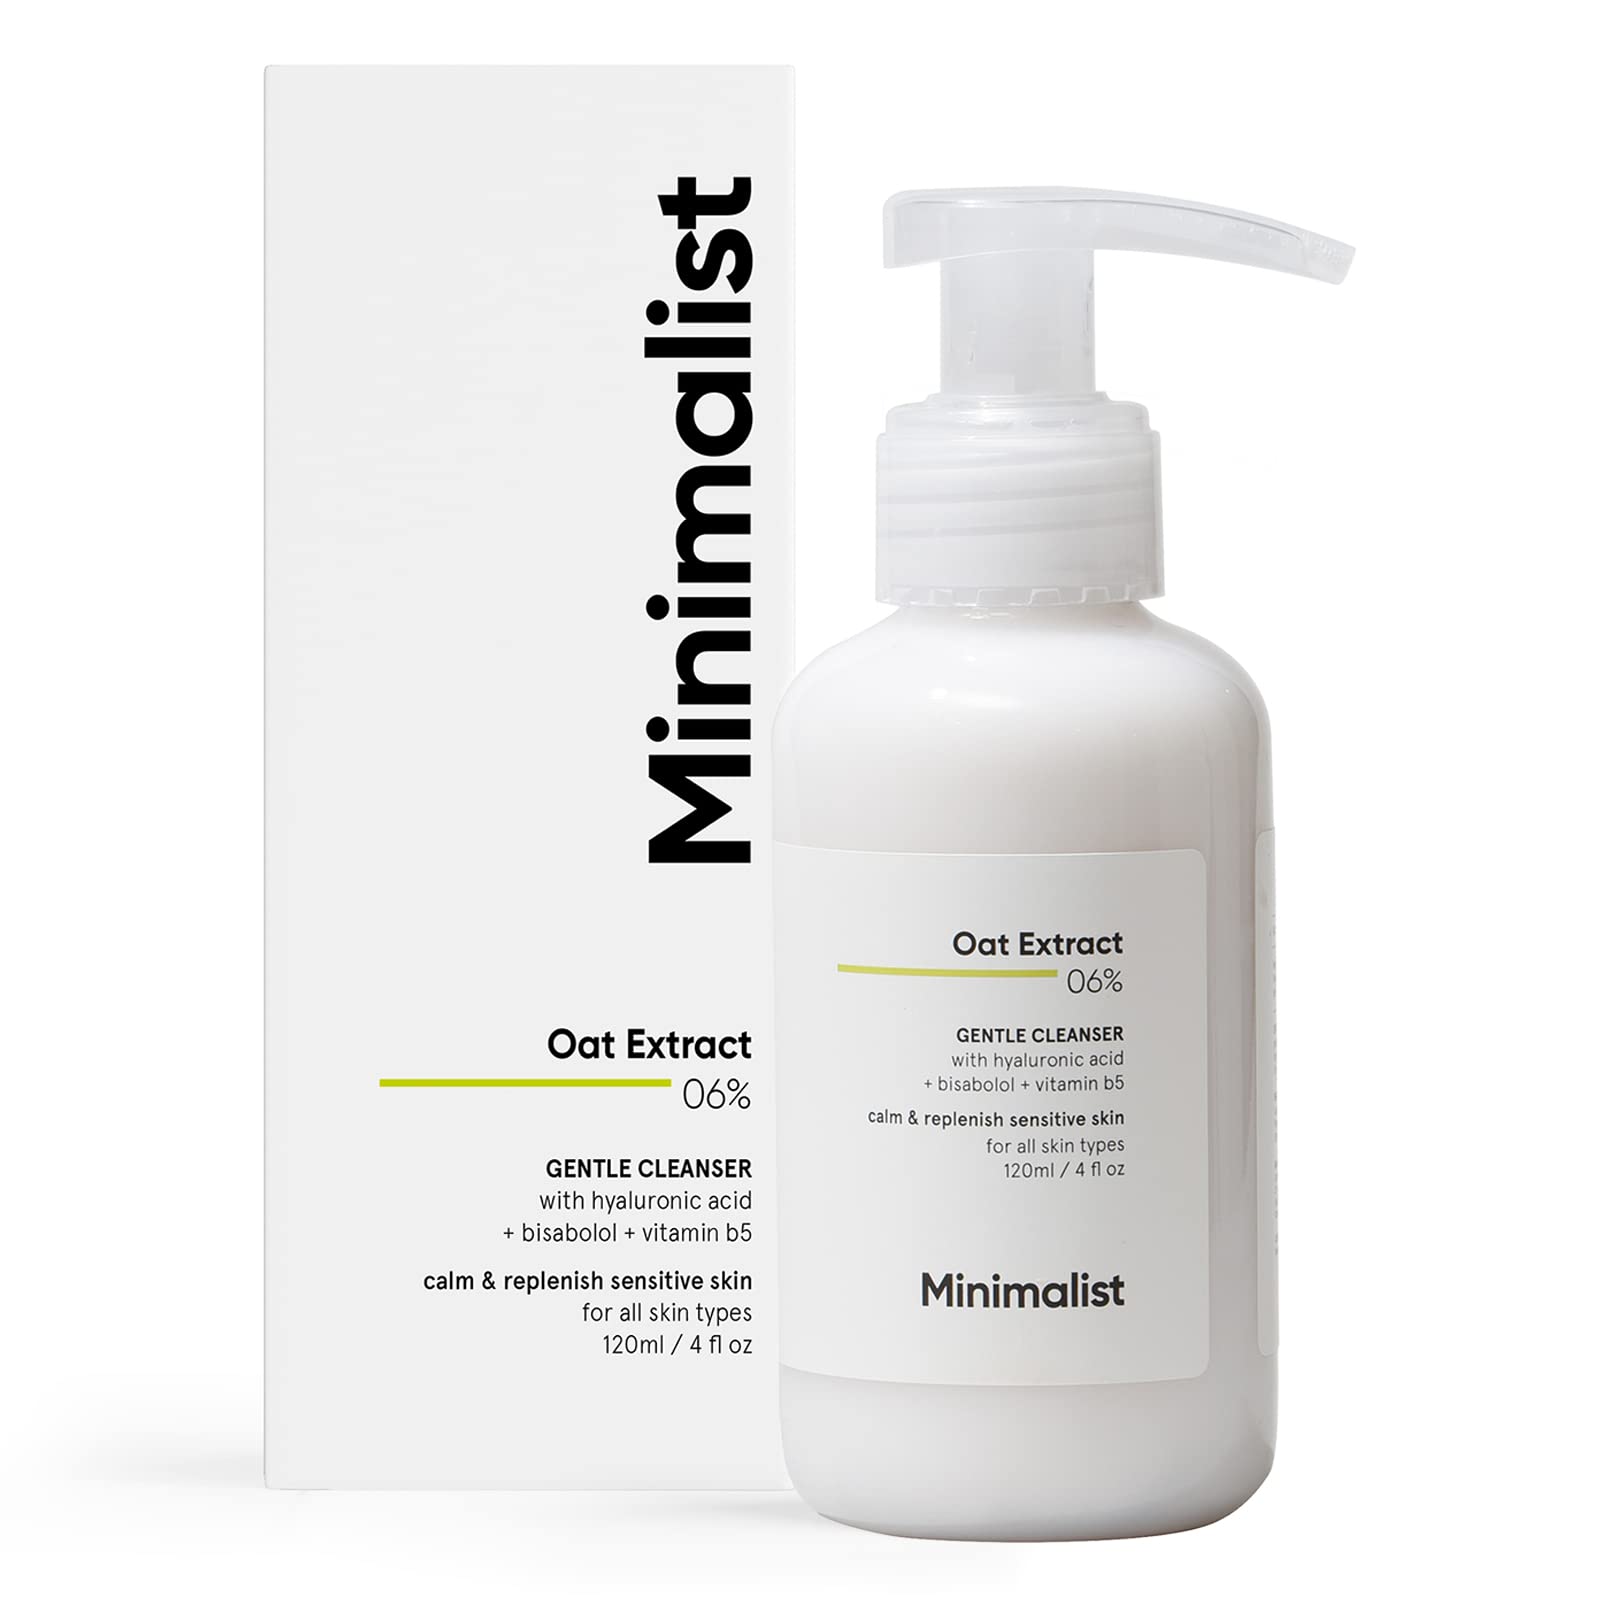 Minimalist Gentle Cleanser 6% Oat Extract For Sensitive Skin (Dry to Normal) | Sulphate Free | Non-Drying | With Hyaluronic Acid (120 ml)